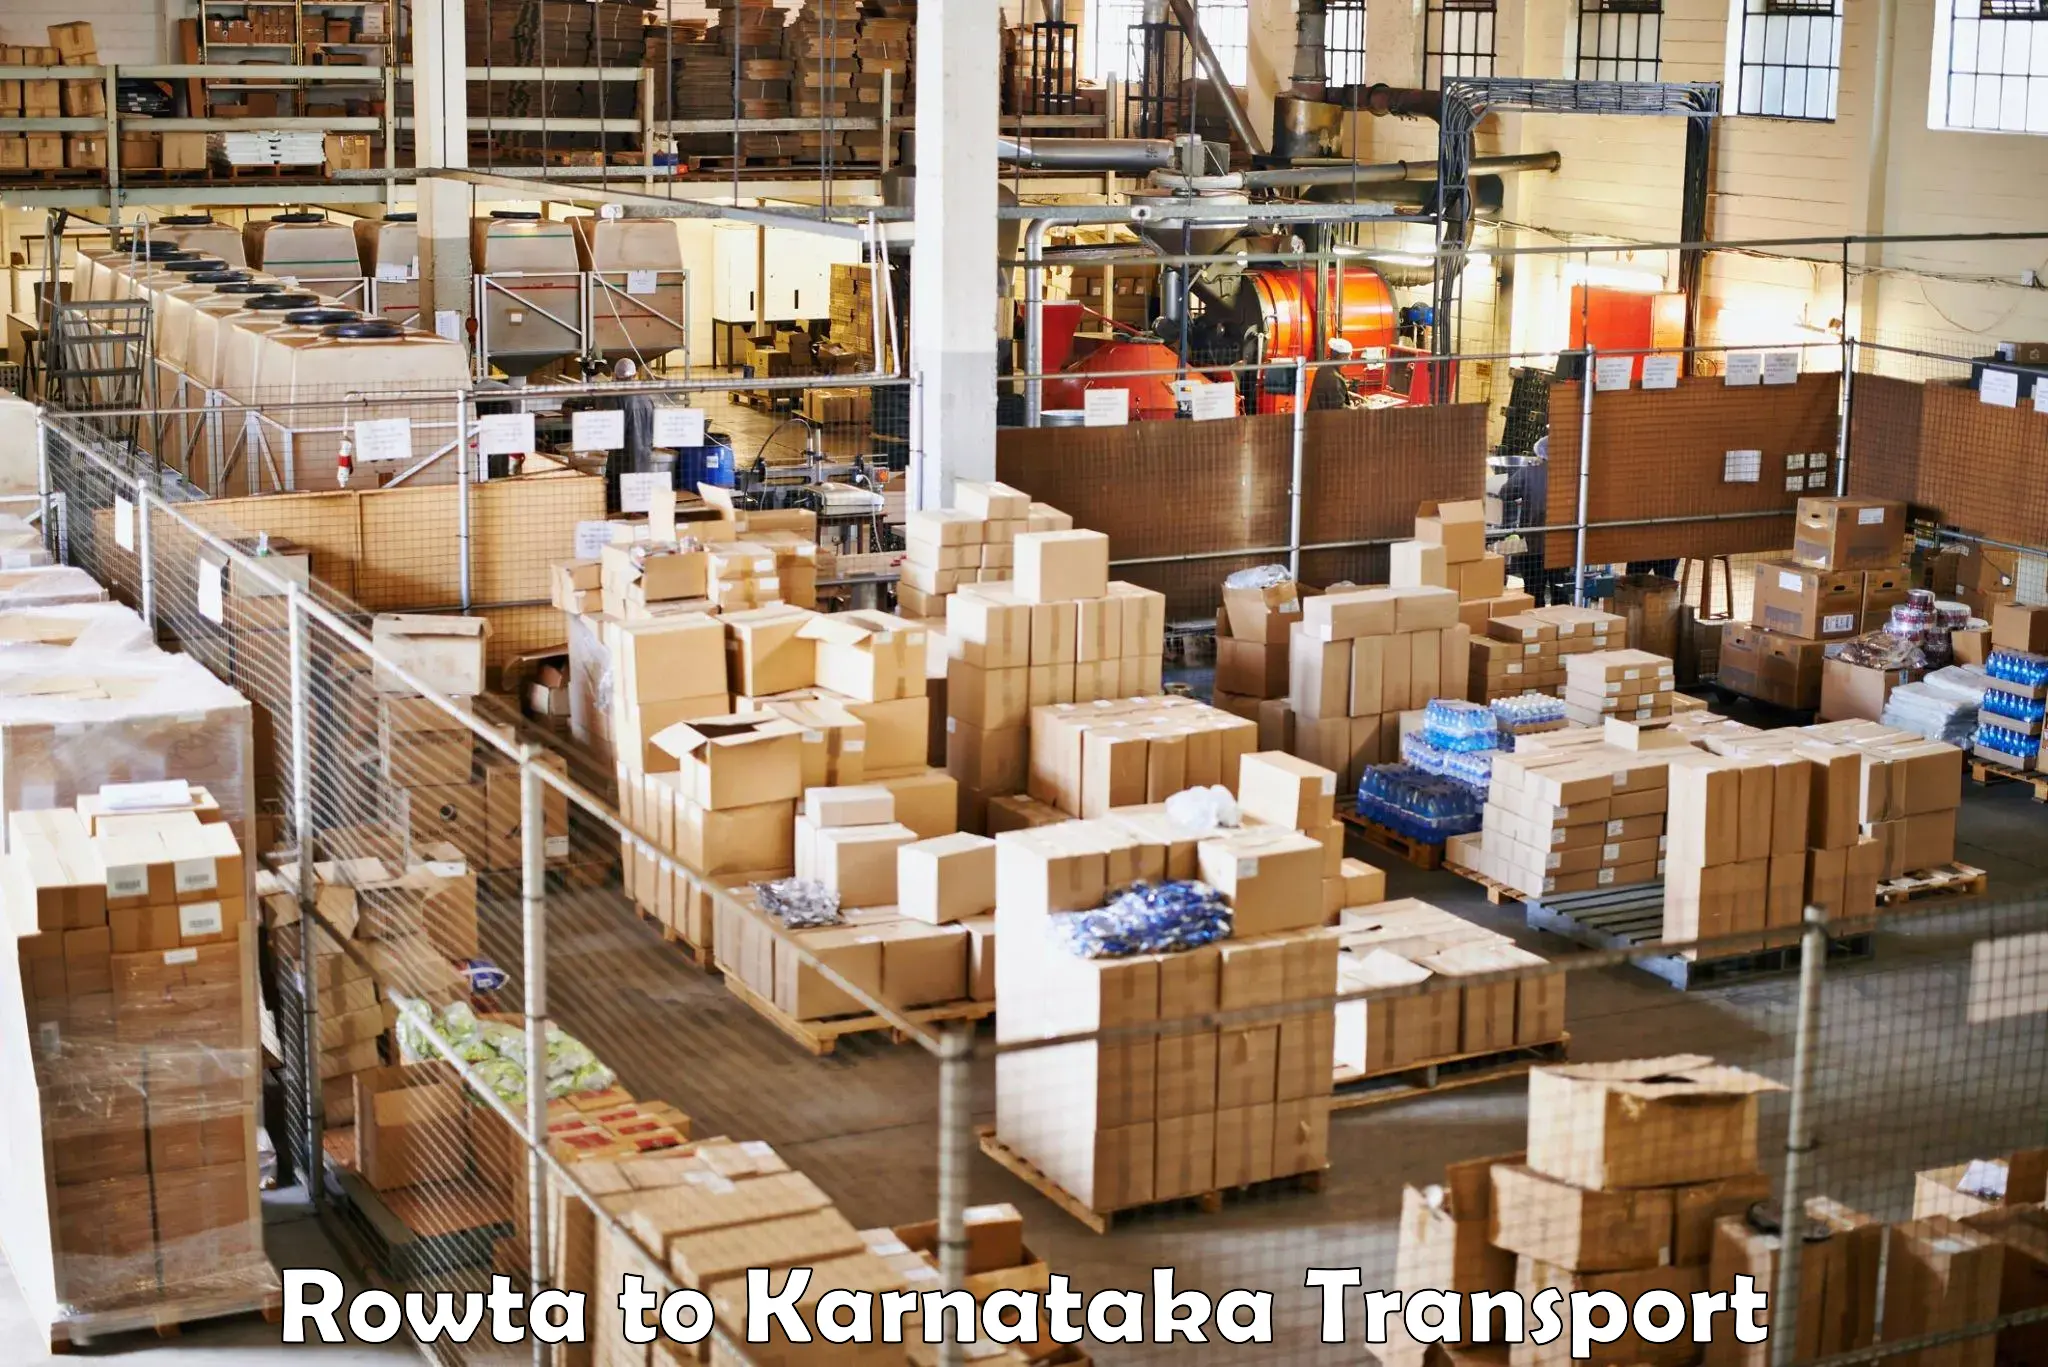 Truck transport companies in India in Rowta to Surathkal